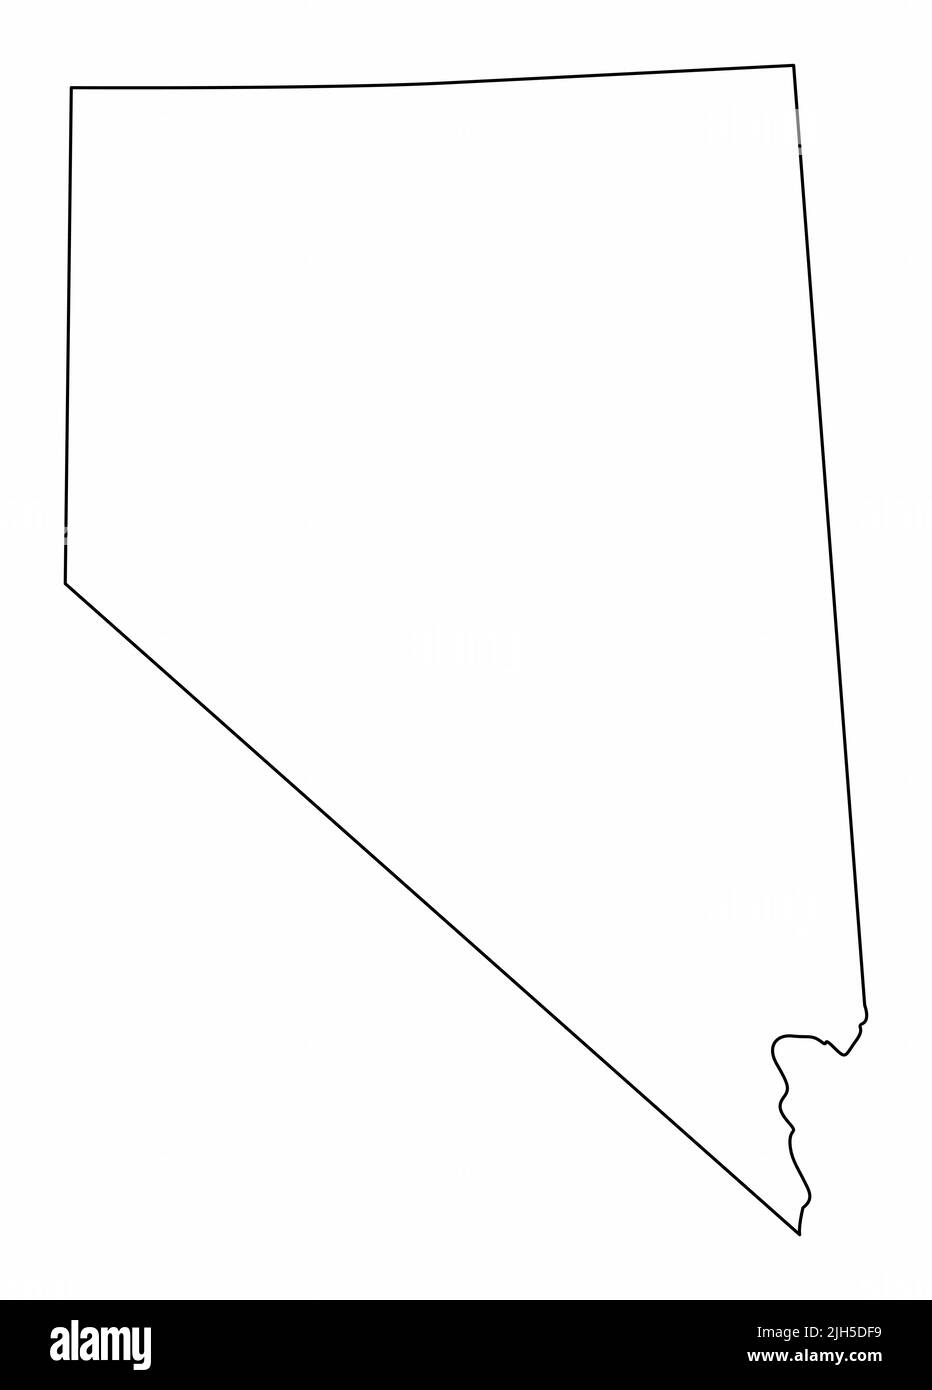 Nevada State isolated map. Black outlines on white background. Stock Vector